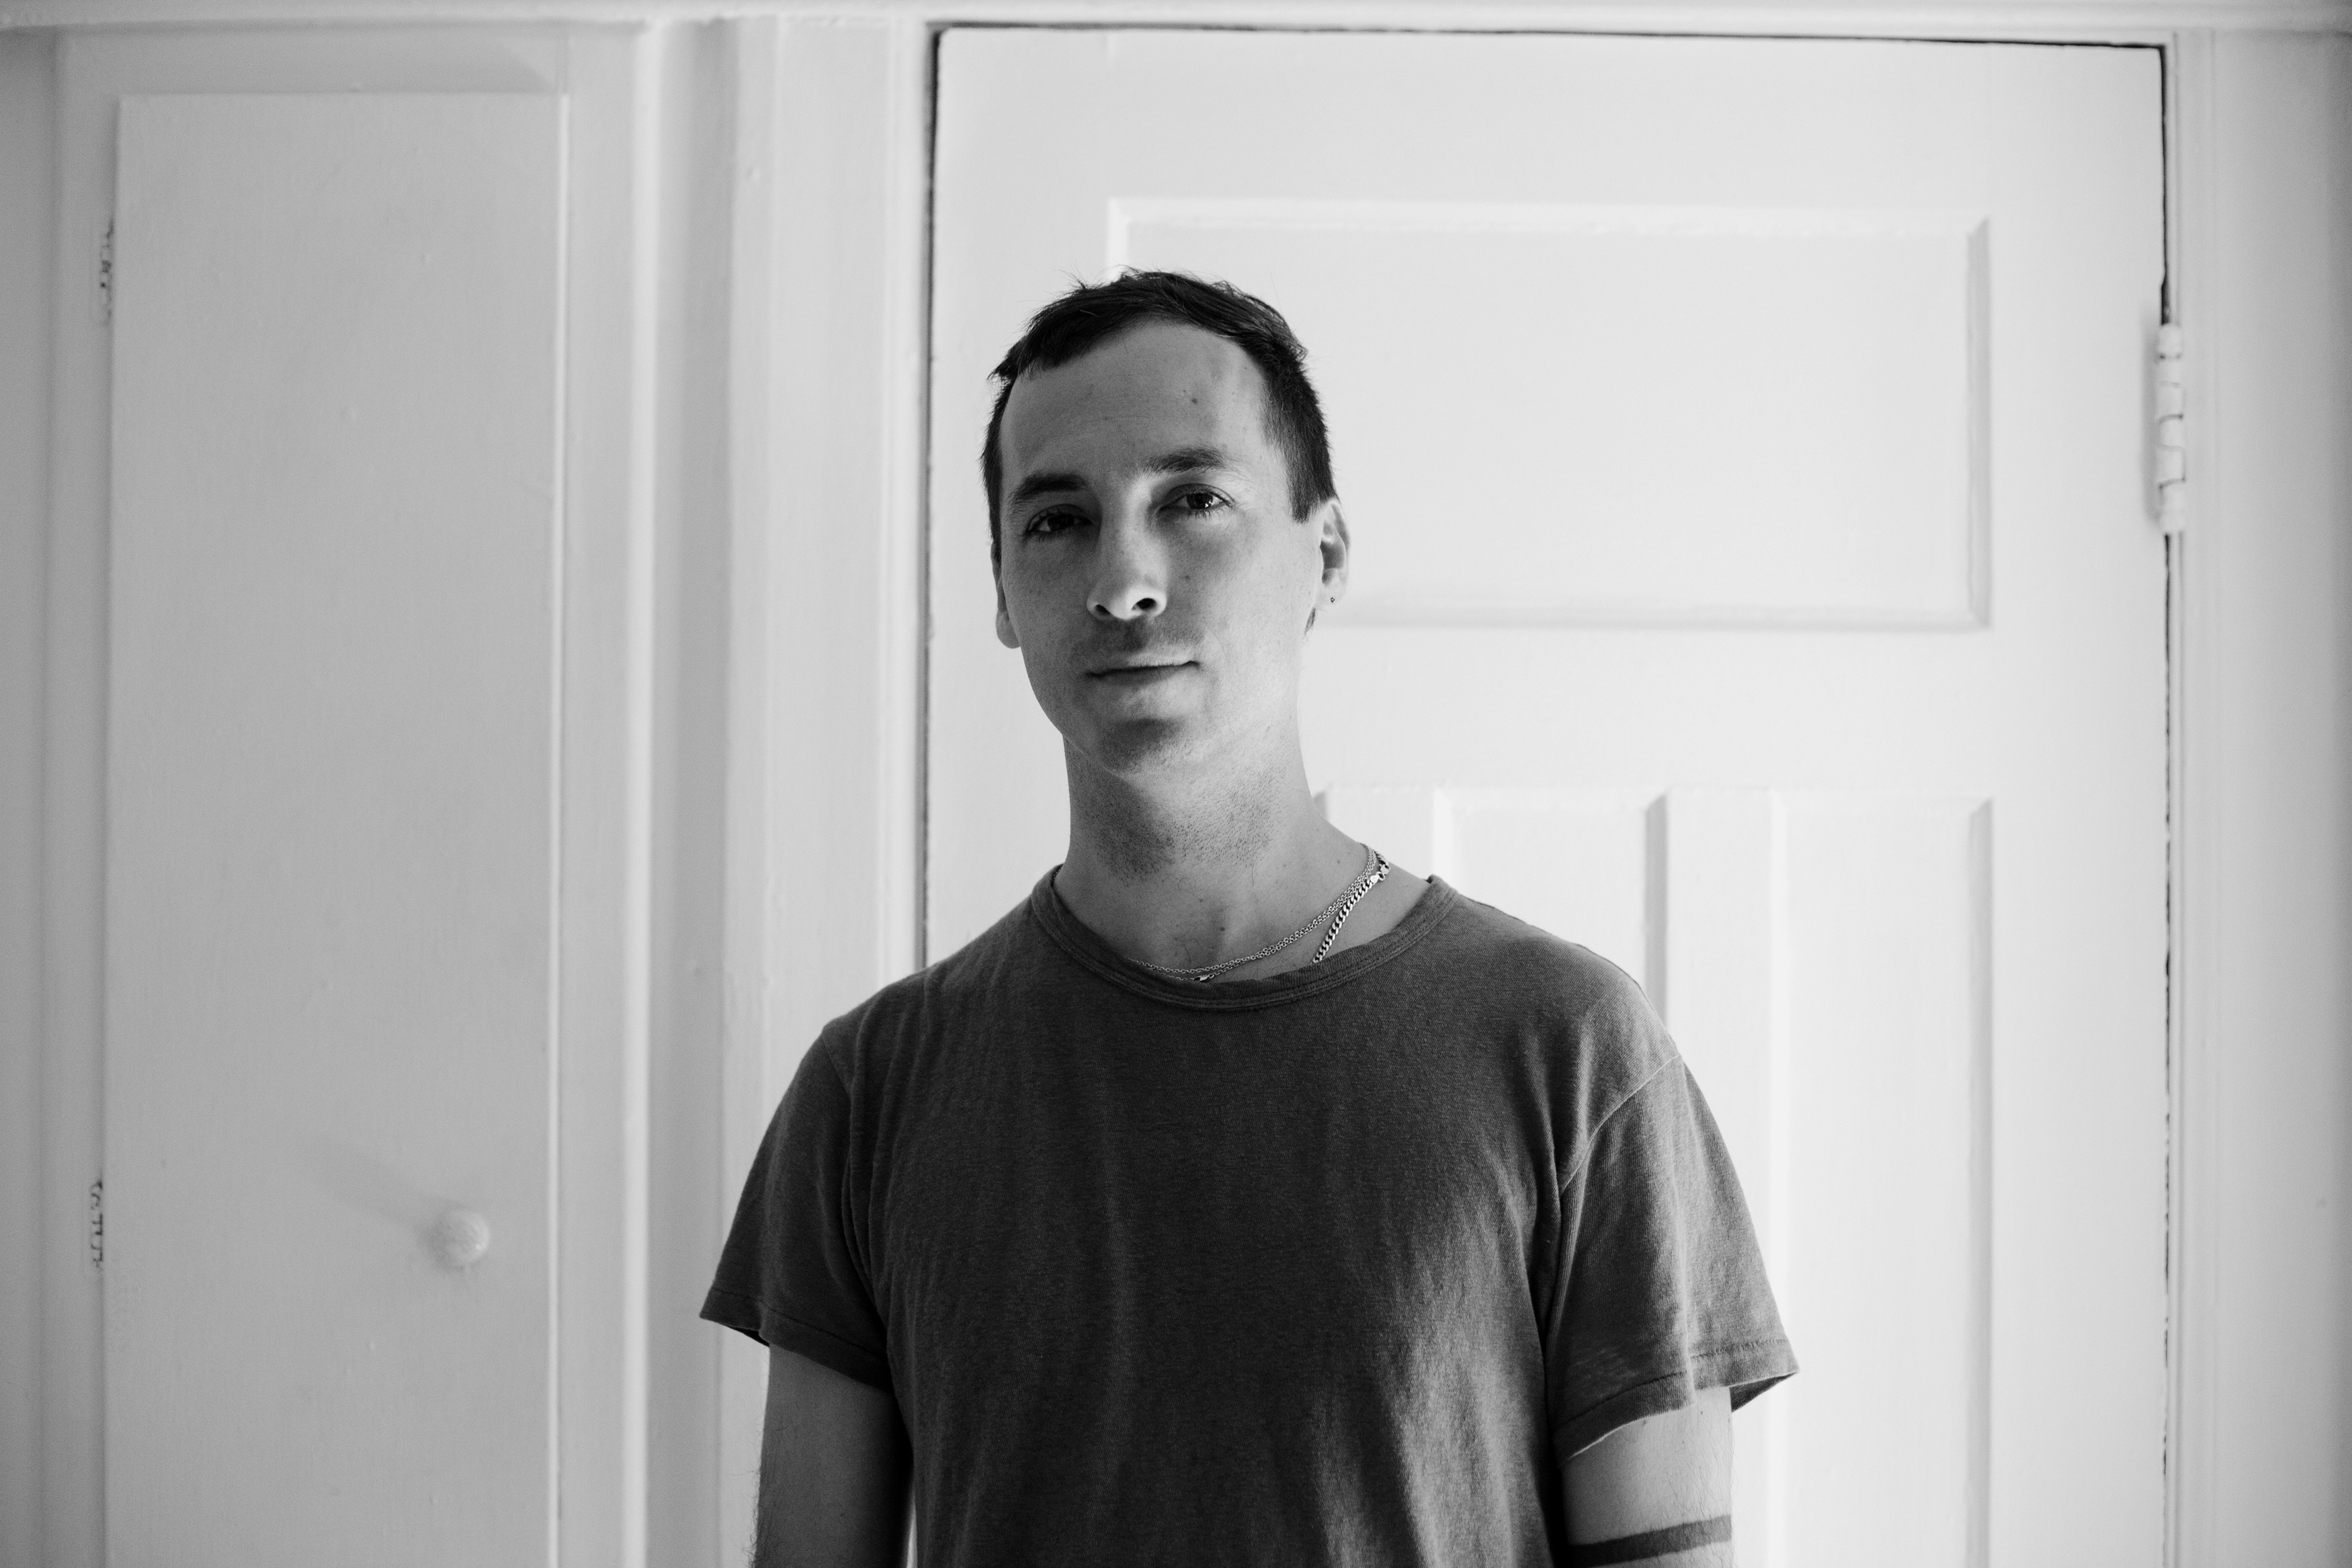 Tim Hecker reveals "Castrati Stack" video, the track comes off his LP 'Love Streams', out April 8, via Paper Bag./4AD